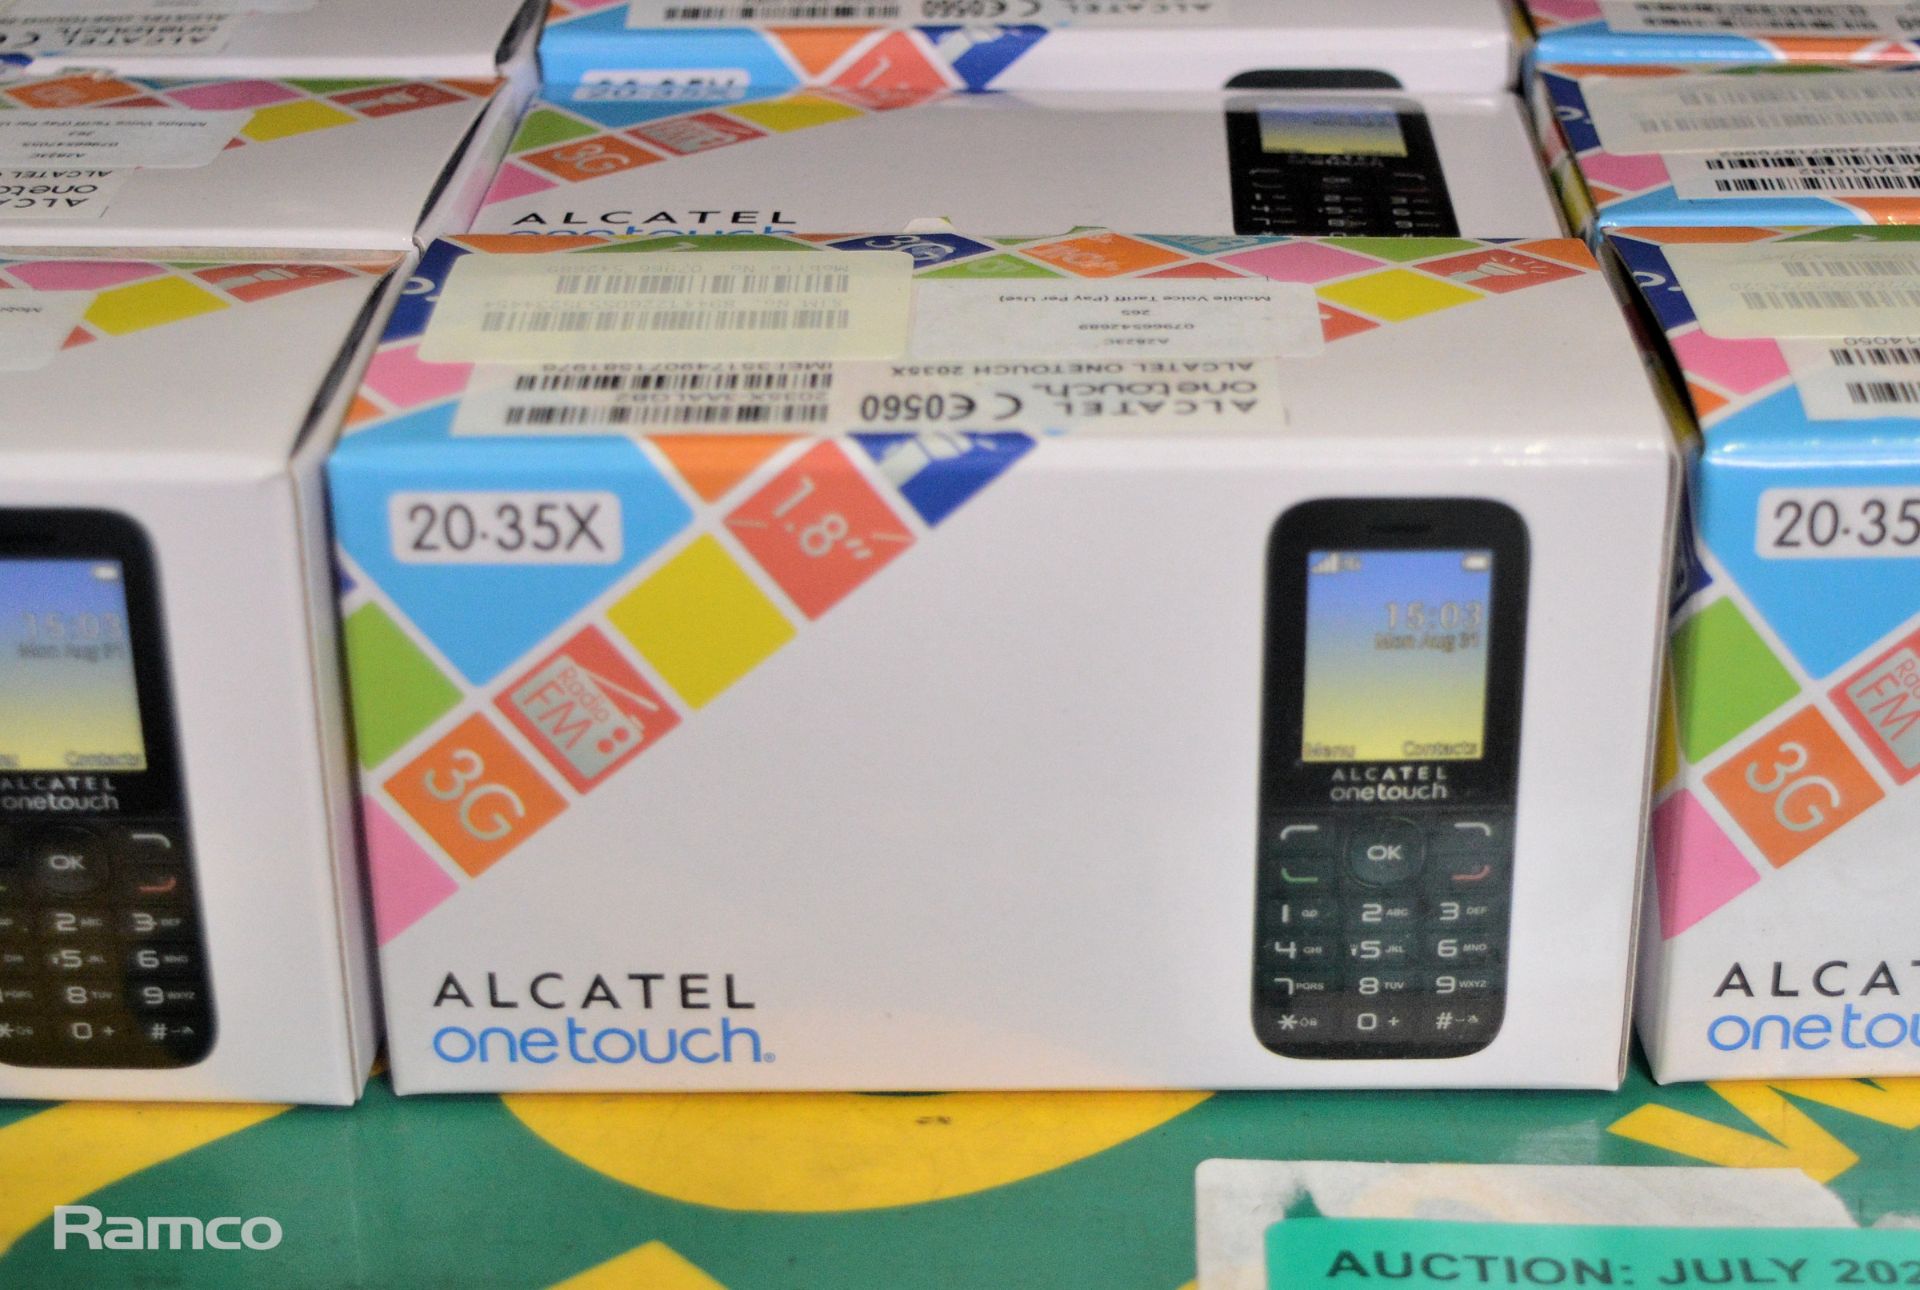 30x Alcatel 2035X One Touch Mobile Phones - Image 2 of 2